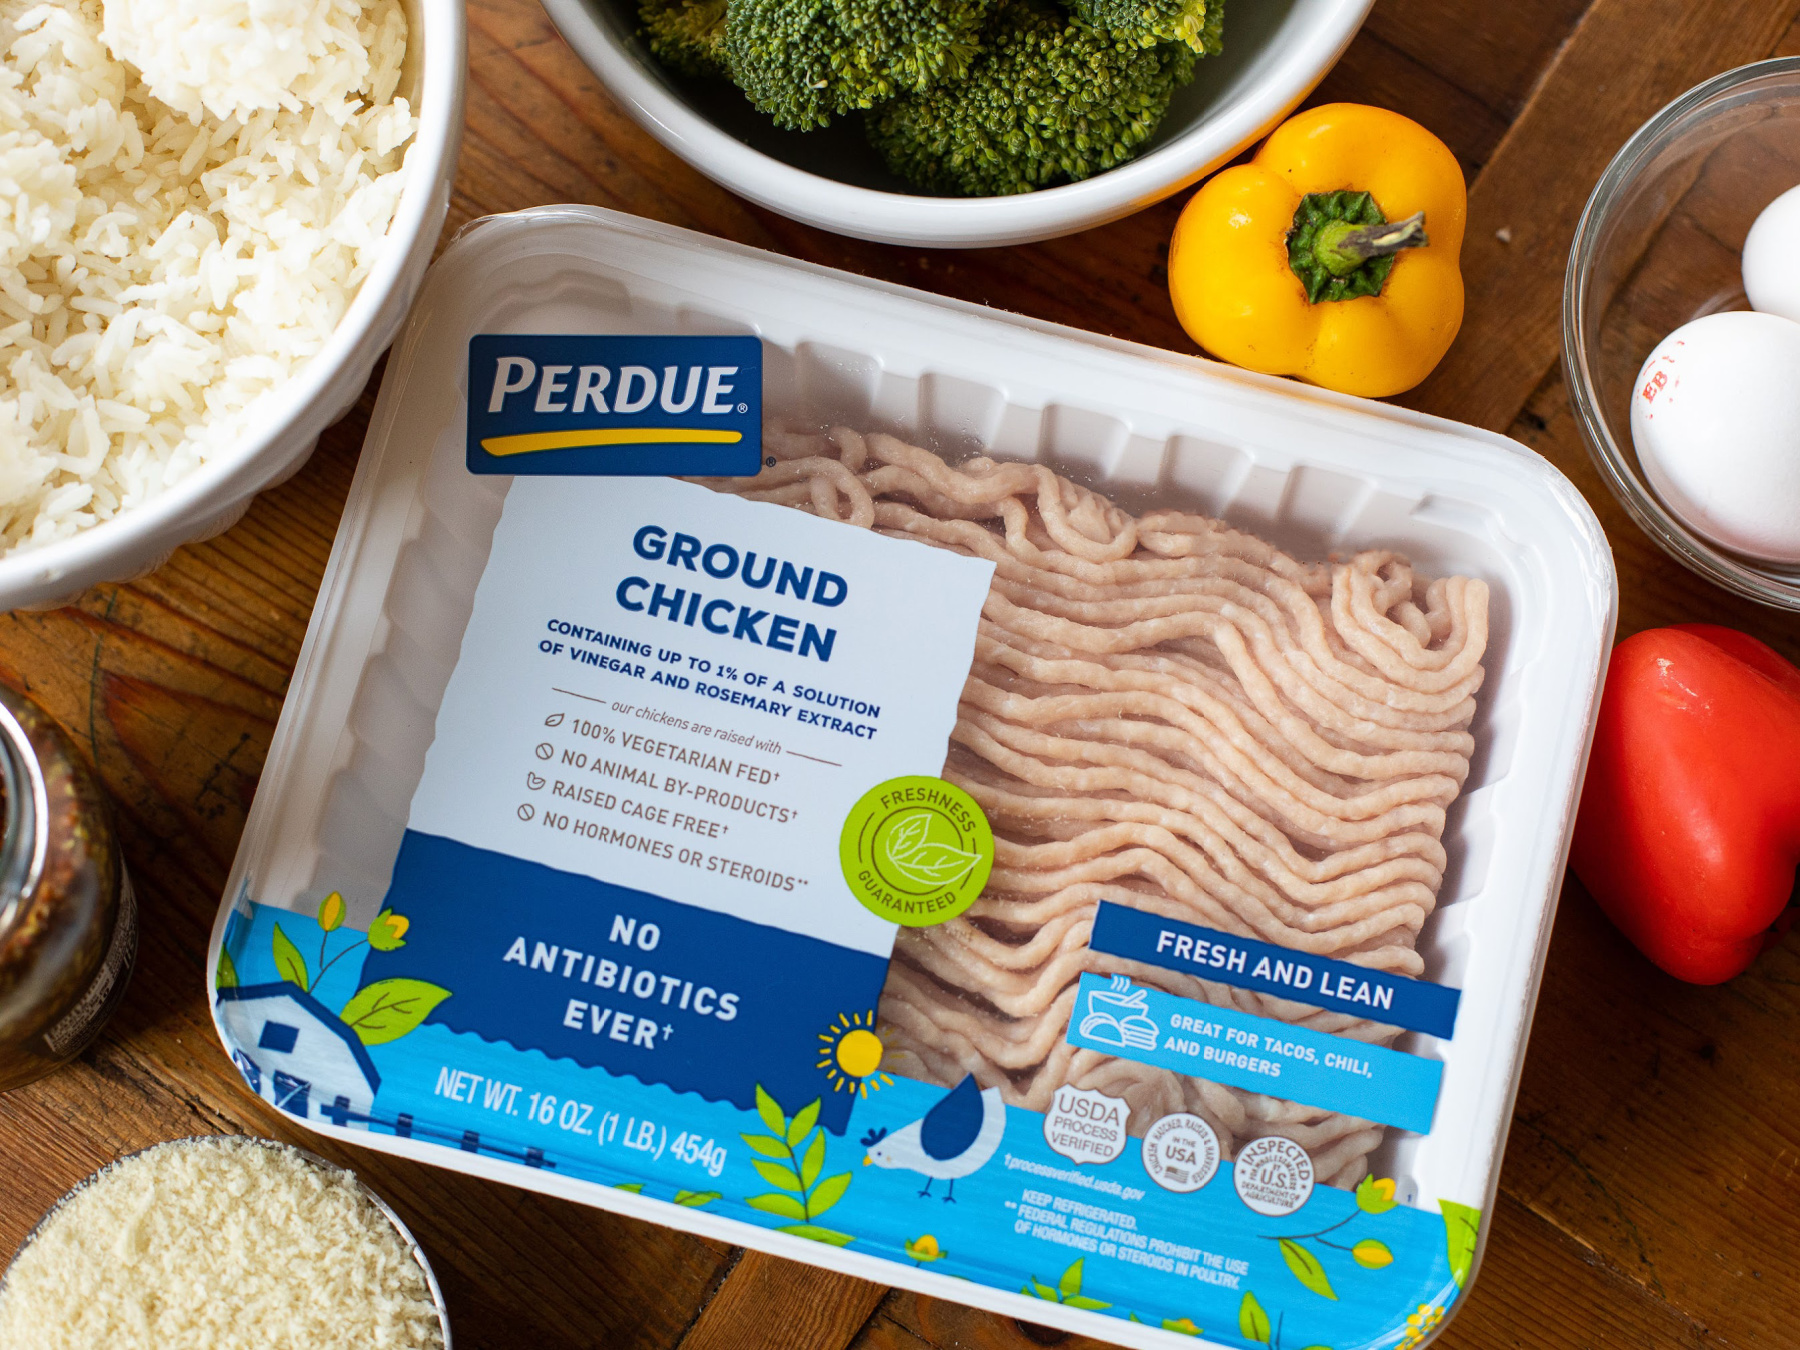 Get Perdue Ground Chicken For Just $2.75 Per Package At Publix